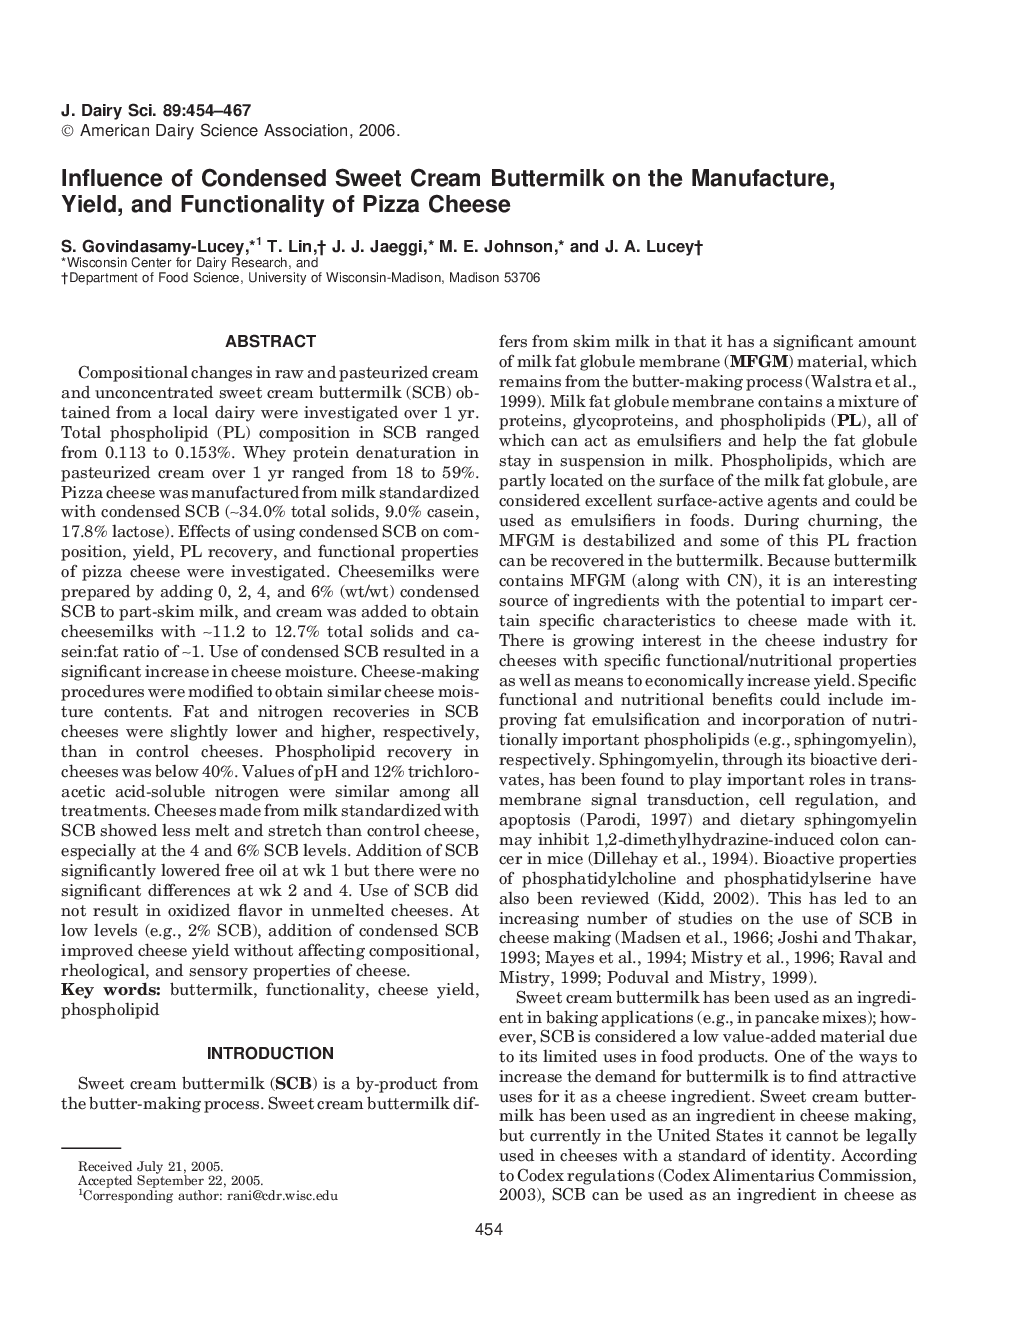 Influence of Condensed Sweet Cream Buttermilk on the Manufacture, Yield, and Functionality of Pizza Cheese